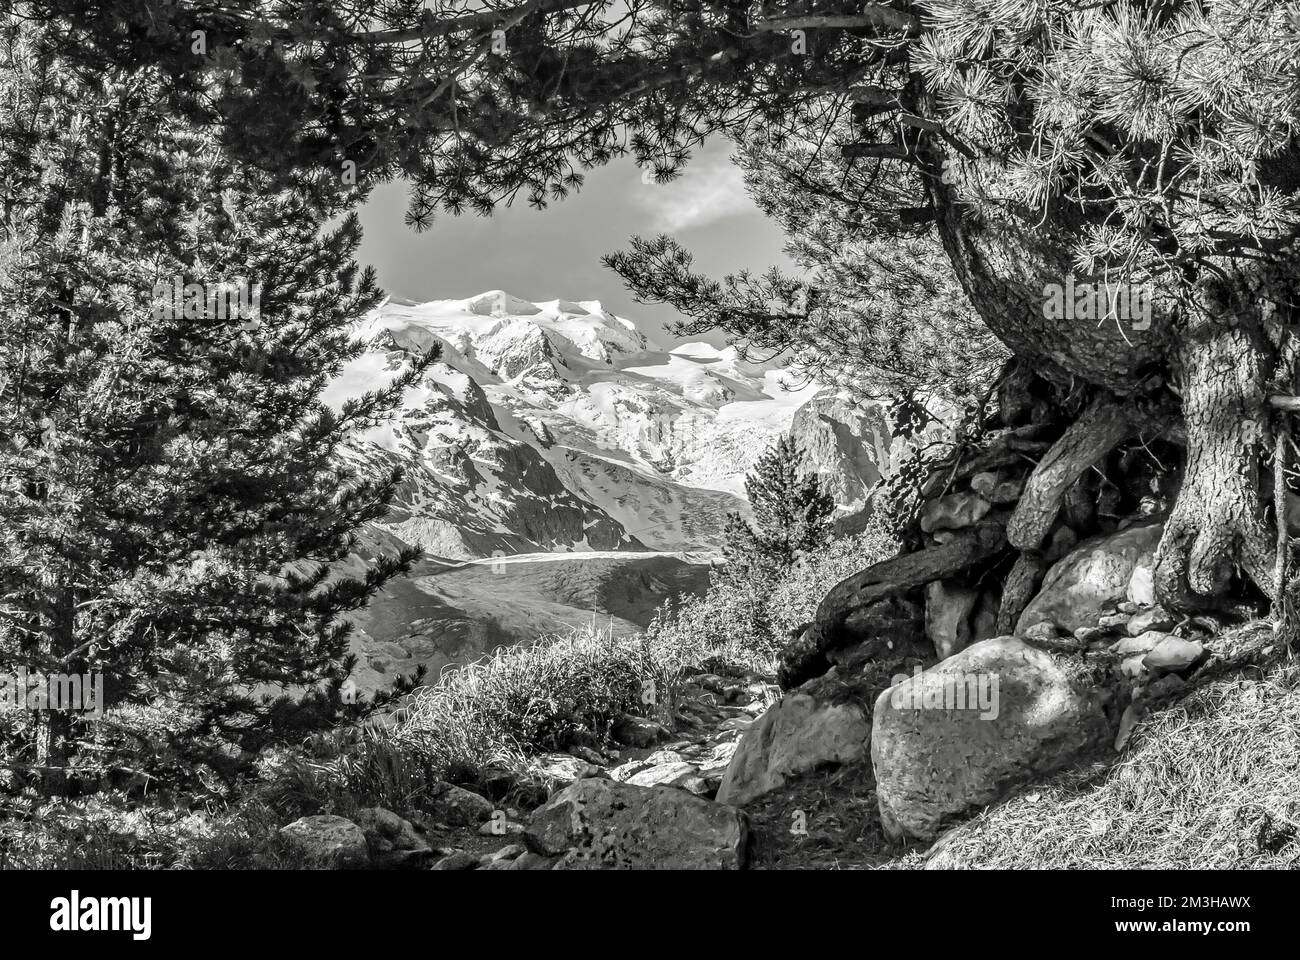 Morteratsch Glacier seen through a tree tunnela from a hiking path, Engadine, Switzerland in black and white Stock Photo